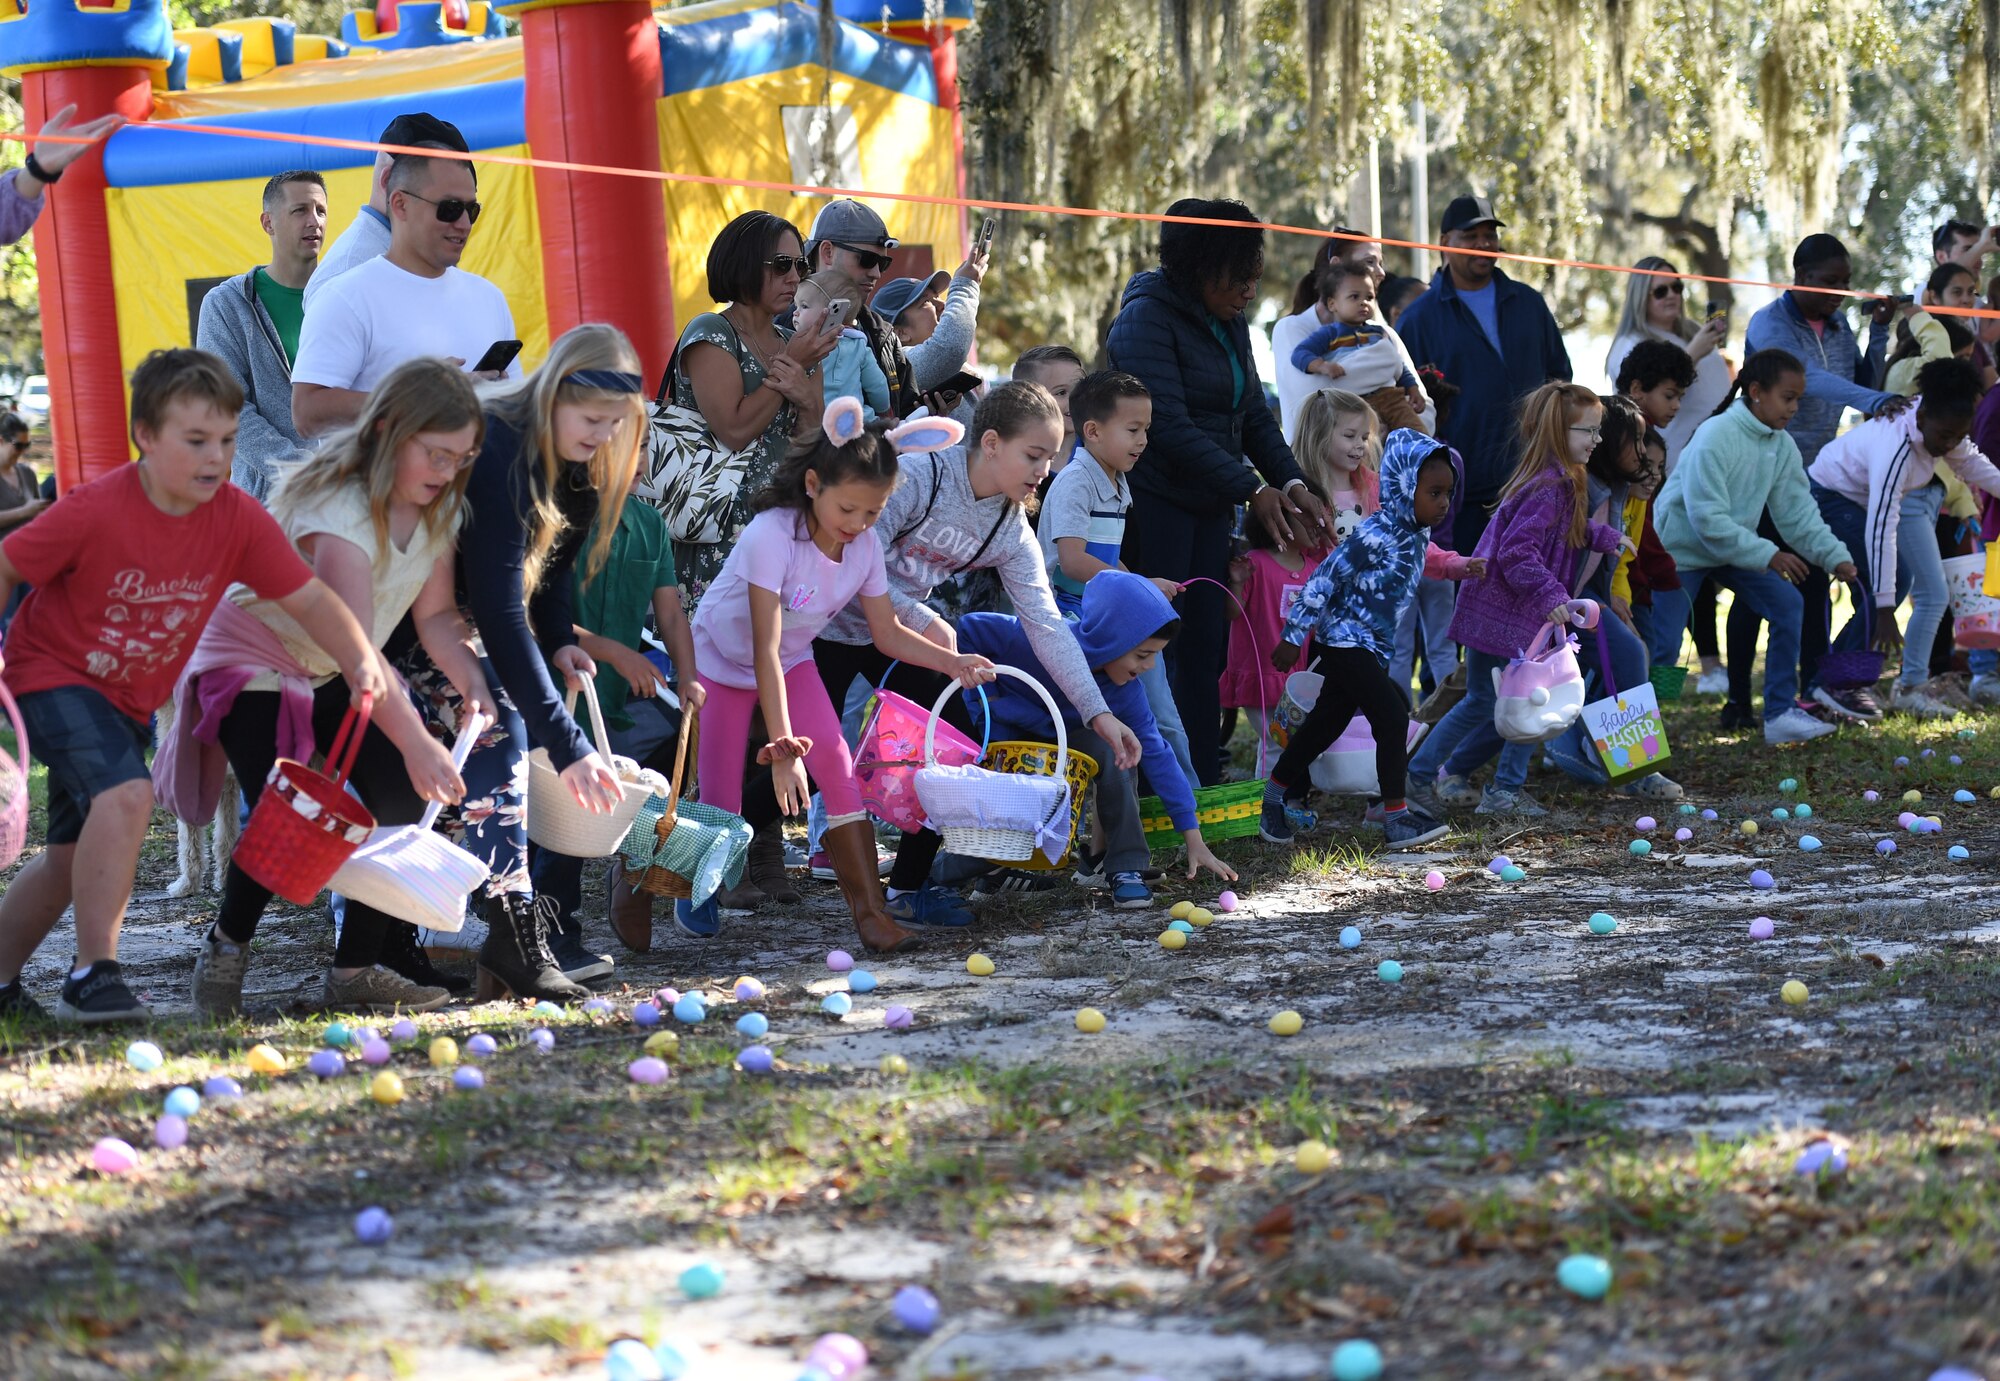 Children of Keesler personnel pick up Easter eggs during Keesler's Eggstravaganza at the marina park at Keesler Air Force Base, Mississippi, April 9, 2022. The 81st Force Support Squadron hosted the event for military children. (U.S. Air Force photo by Kemberly Groue)